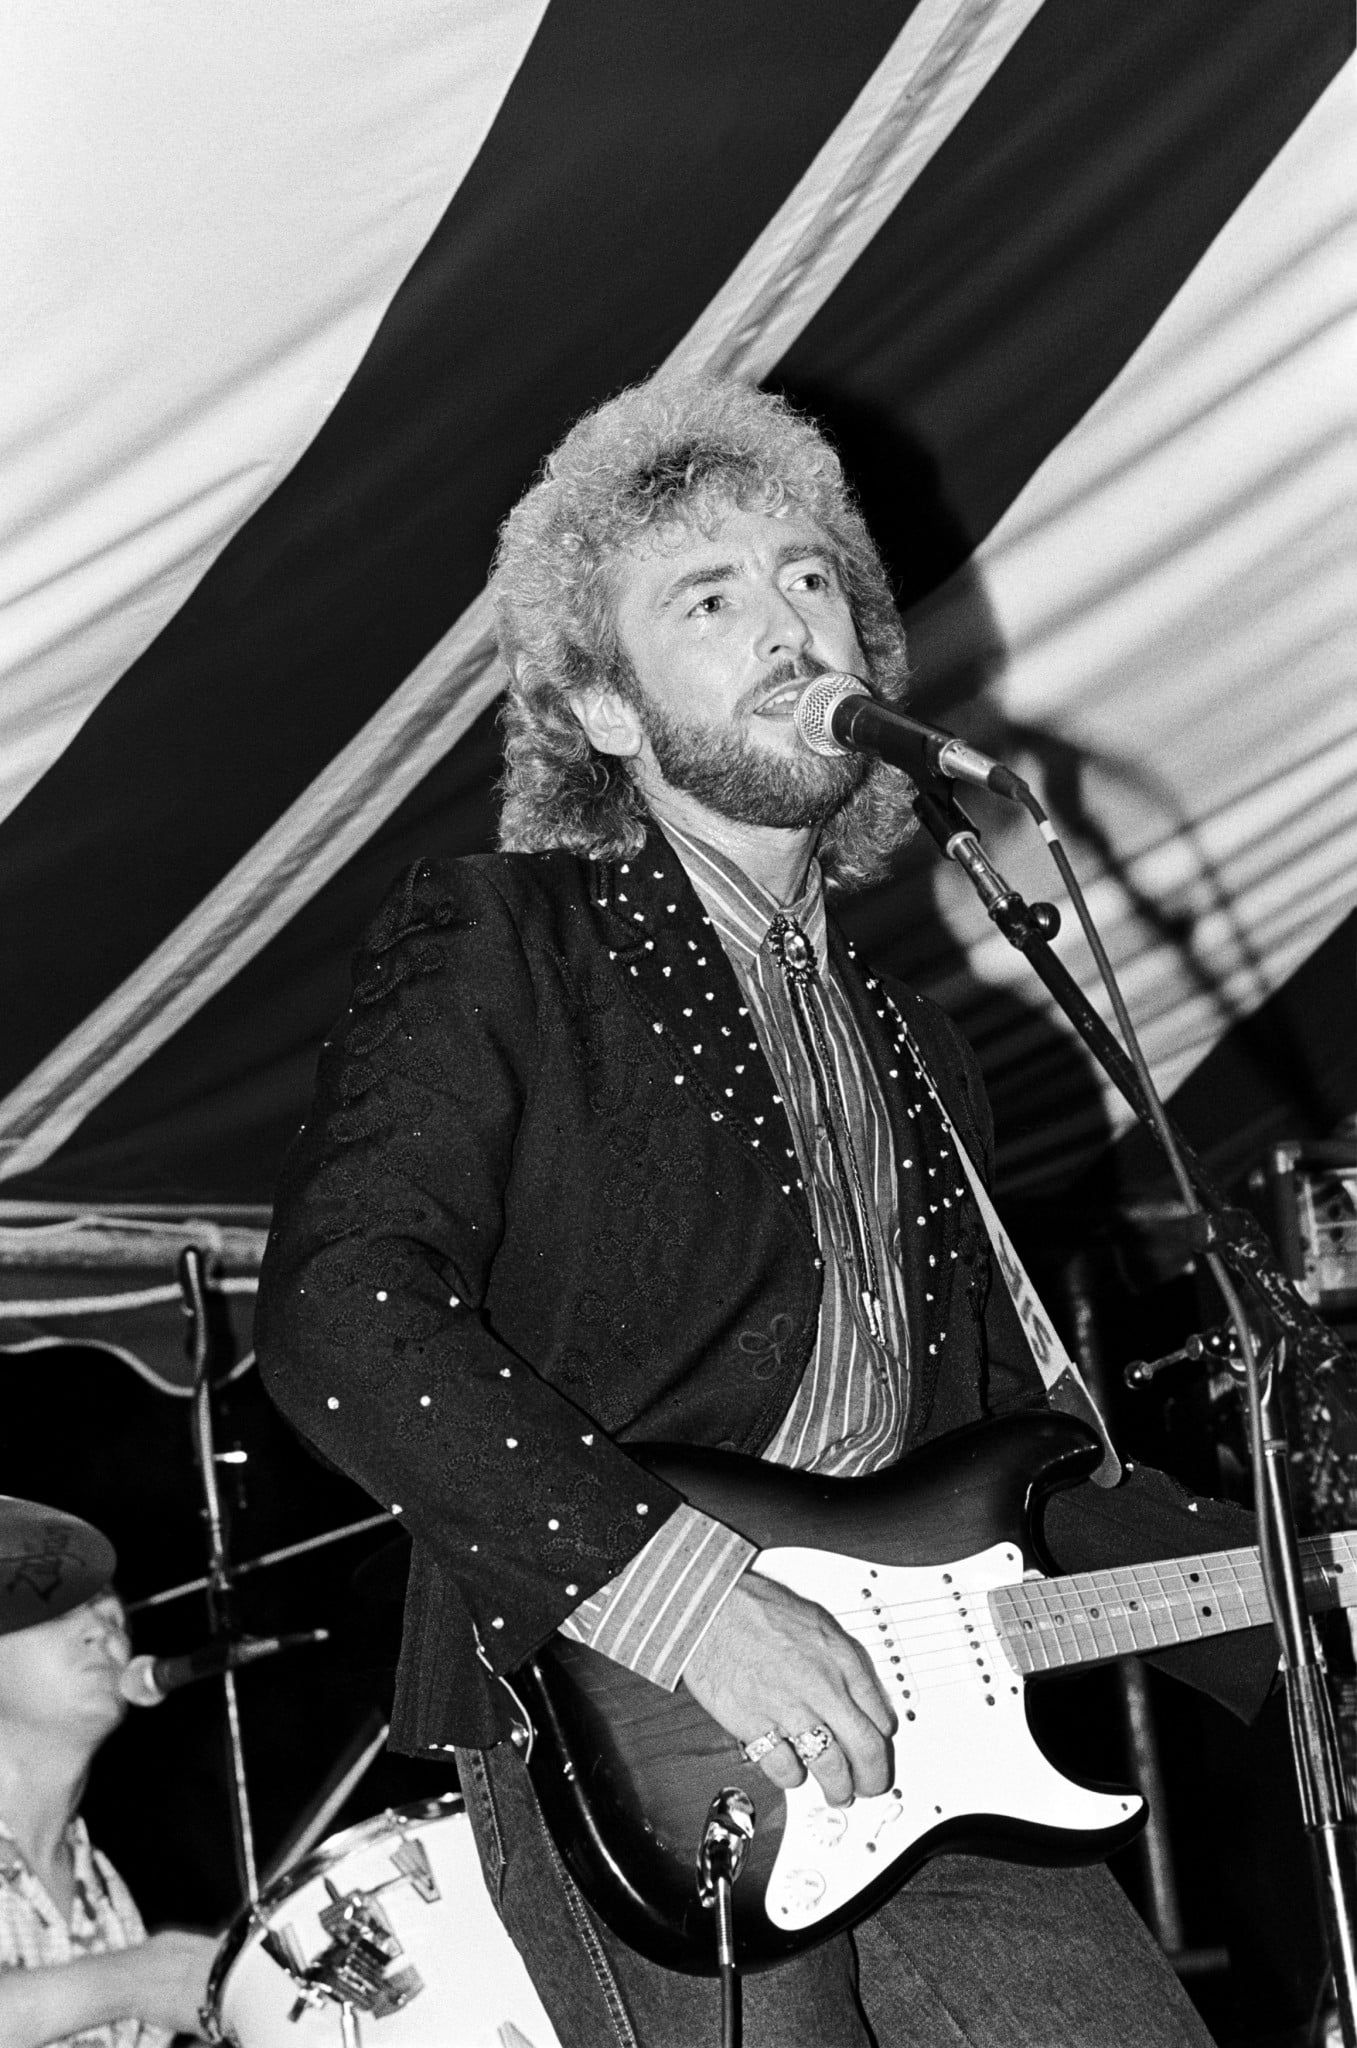 Keith Whitley delivered one of his final performances in the UK. He died just two months later.